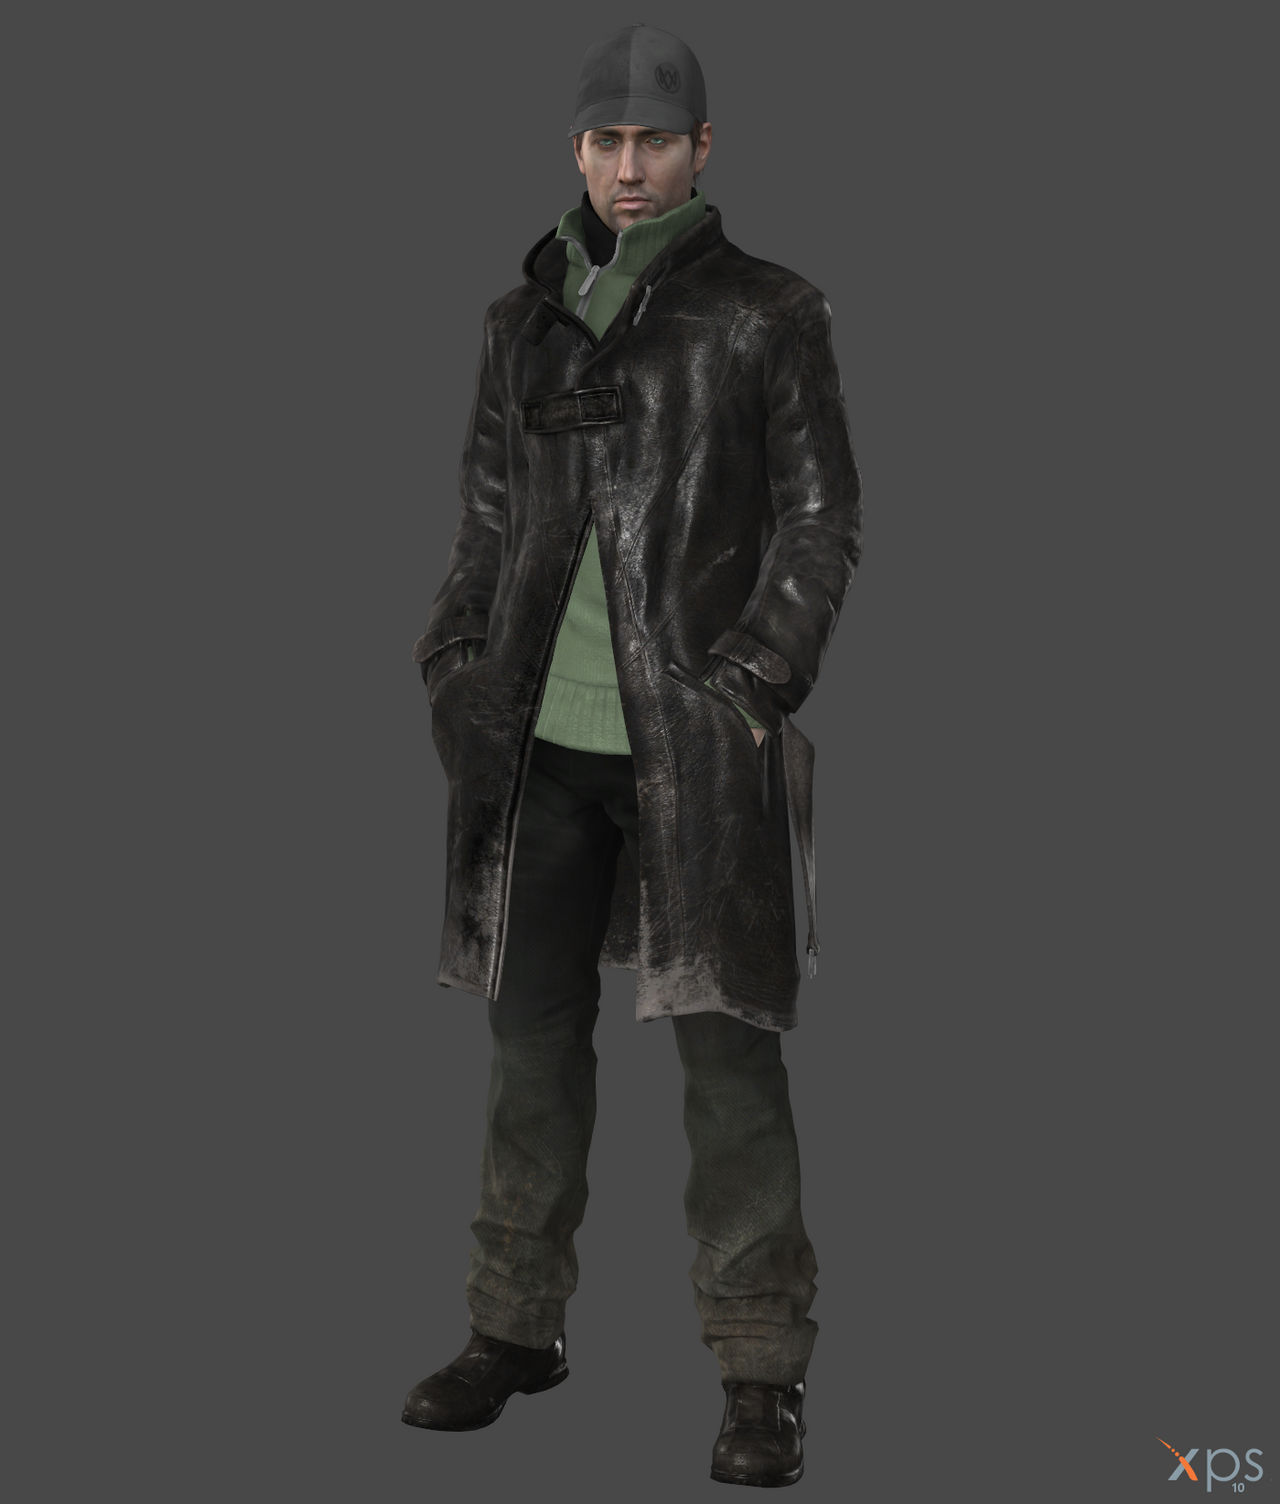 Aiden Pearce (Chicago South Club Outfit) by angelmora9021 on DeviantArt